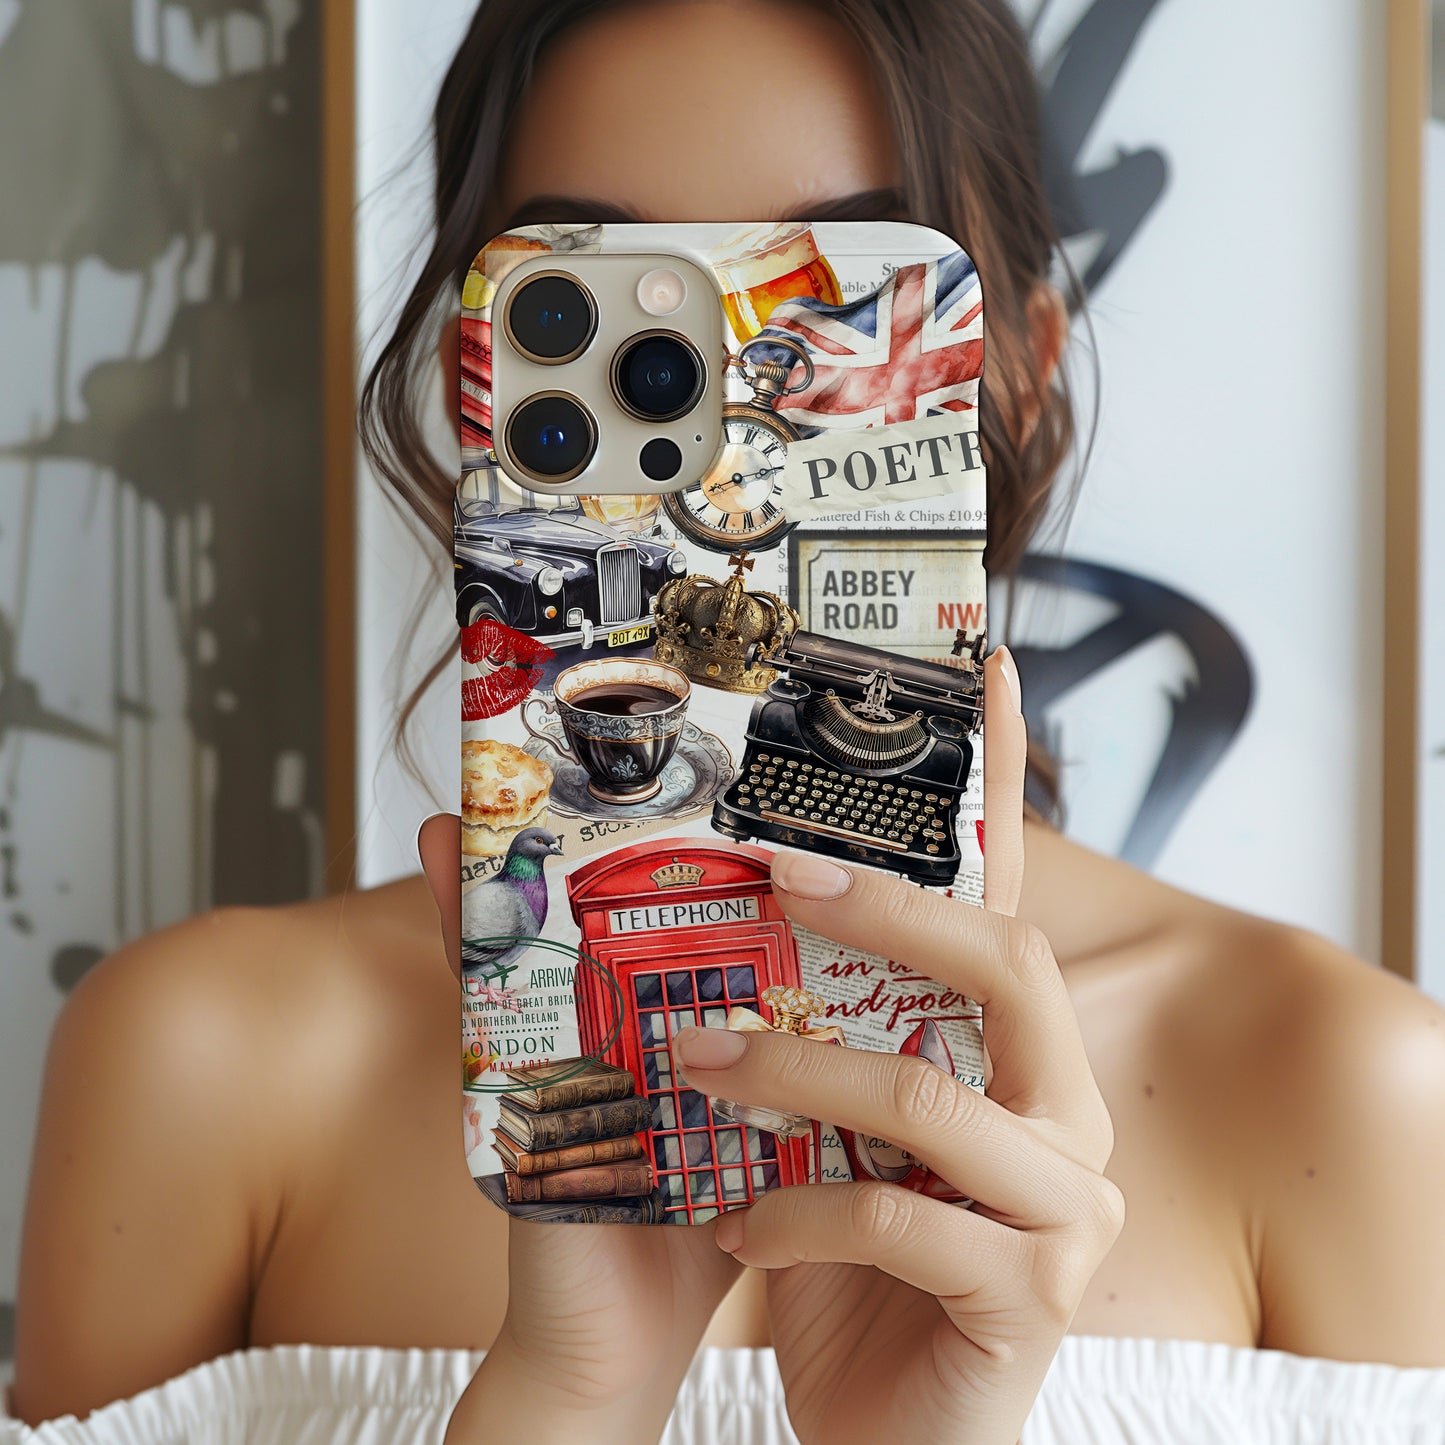 Girl holding So Long London Tortured Poets Department Collage Phone Case by Artscape Market